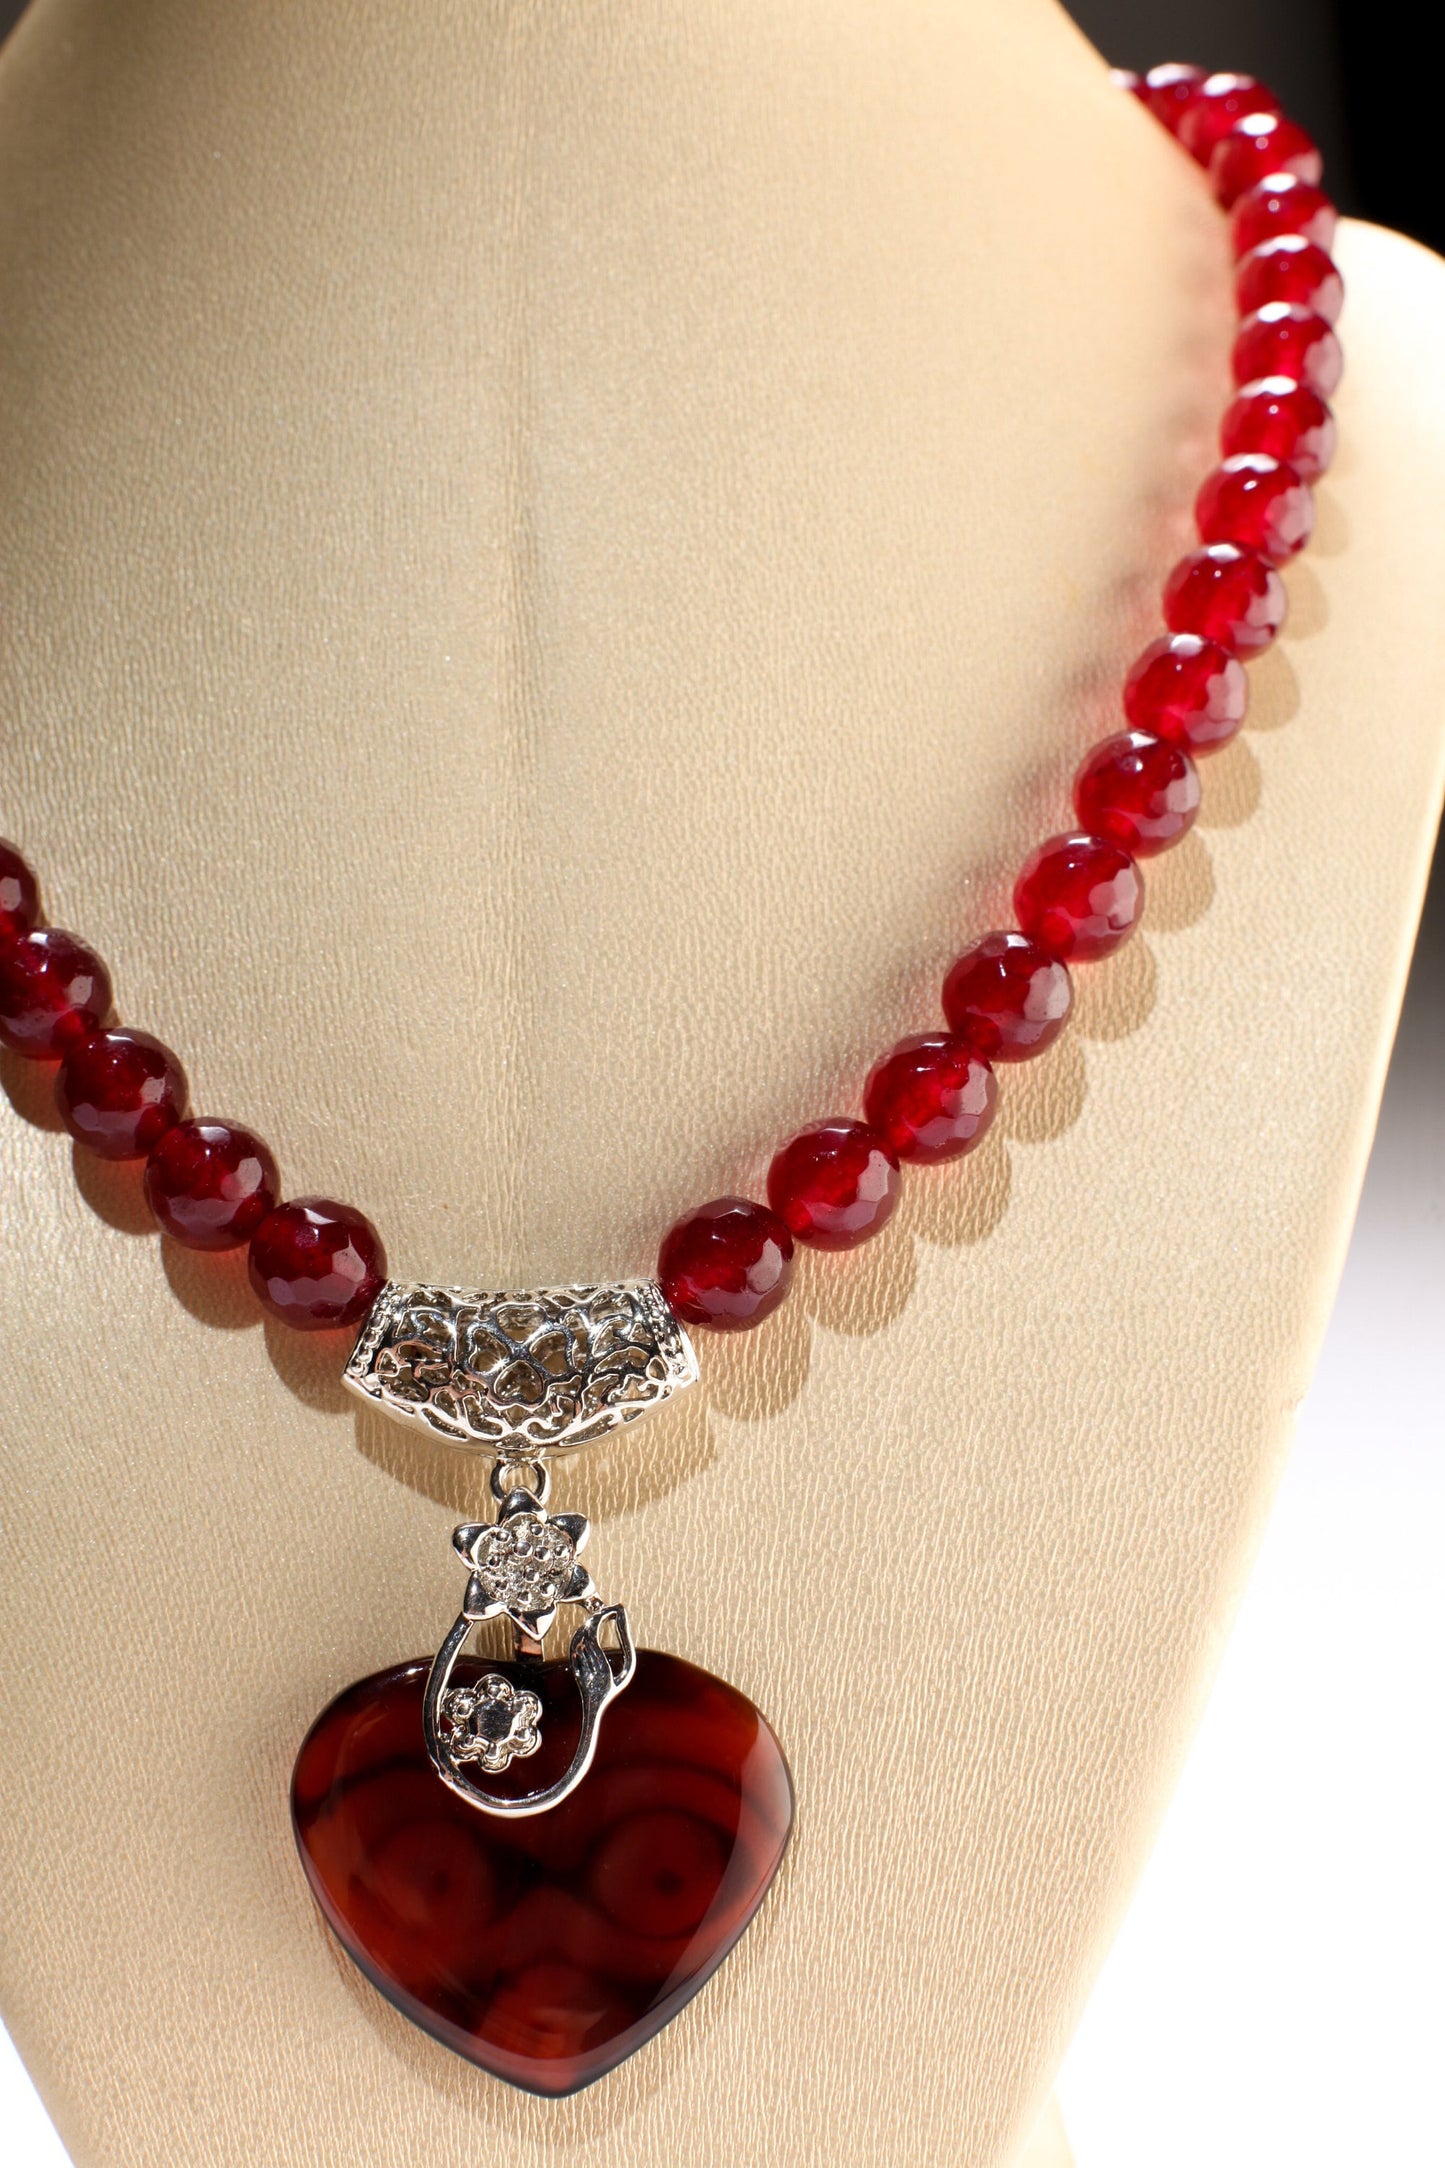 Rasberry Quartz Faceted Round Beads with Heart Shape Evil Eye DZI Agate, Rhodium Silver Filigree Fancy Bail 18.5" Necklace with 3" Extension